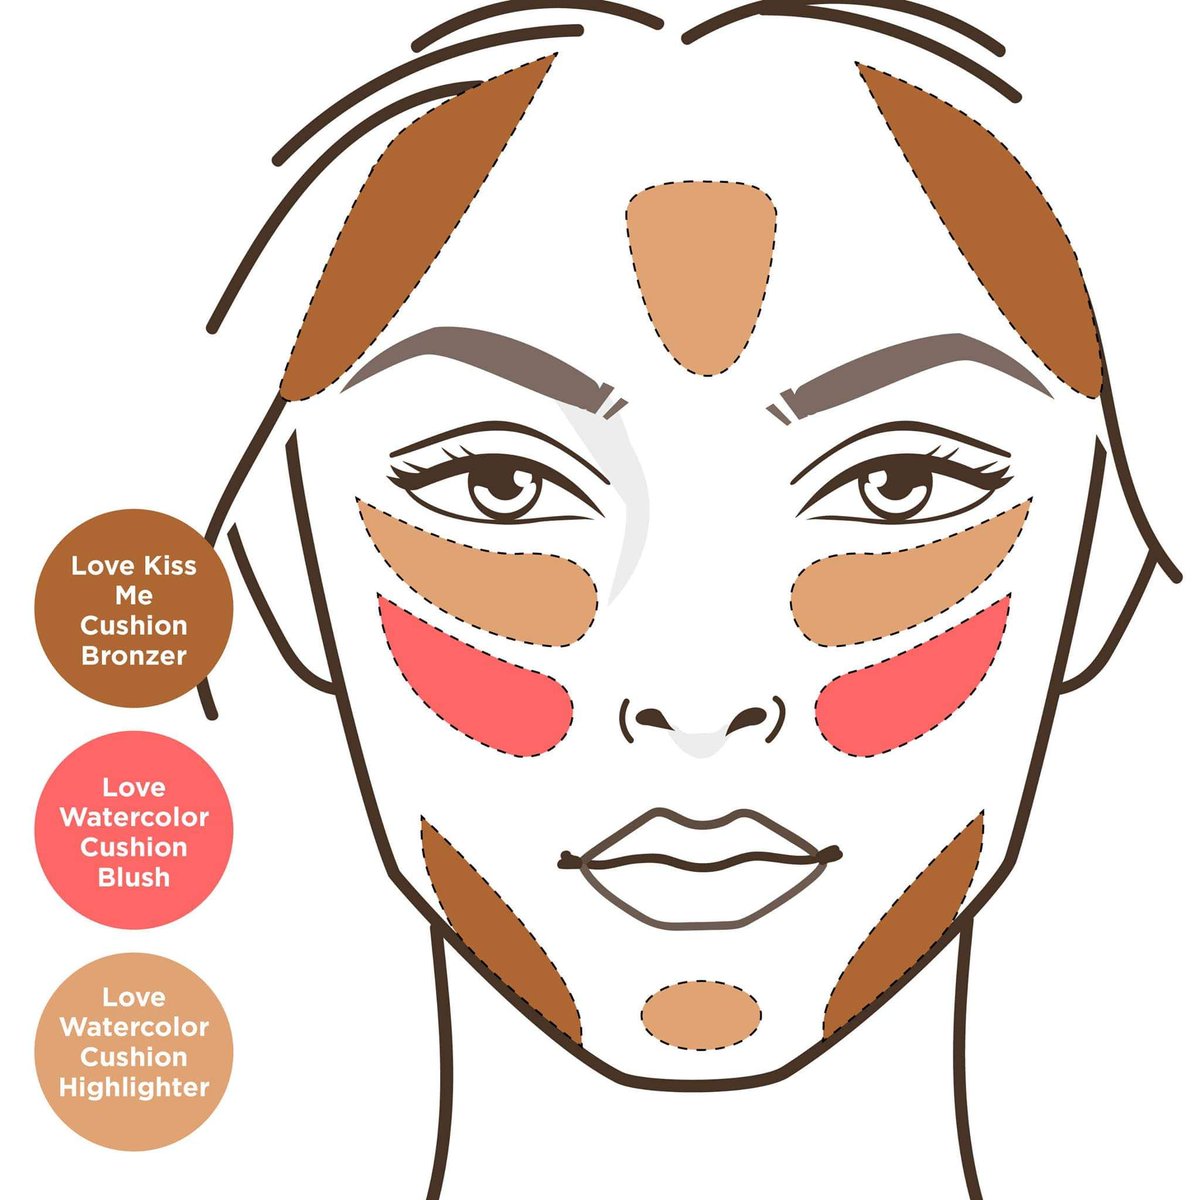 ånd oprejst kritiker Modupe Aromire on Twitter: "Want to flatter your face in all the right  places? Follow our easy Colors of Love chart to apply your bronzer,  highlighter and blush. @ https://t.co/b95JWdelPq #blush #makeup #